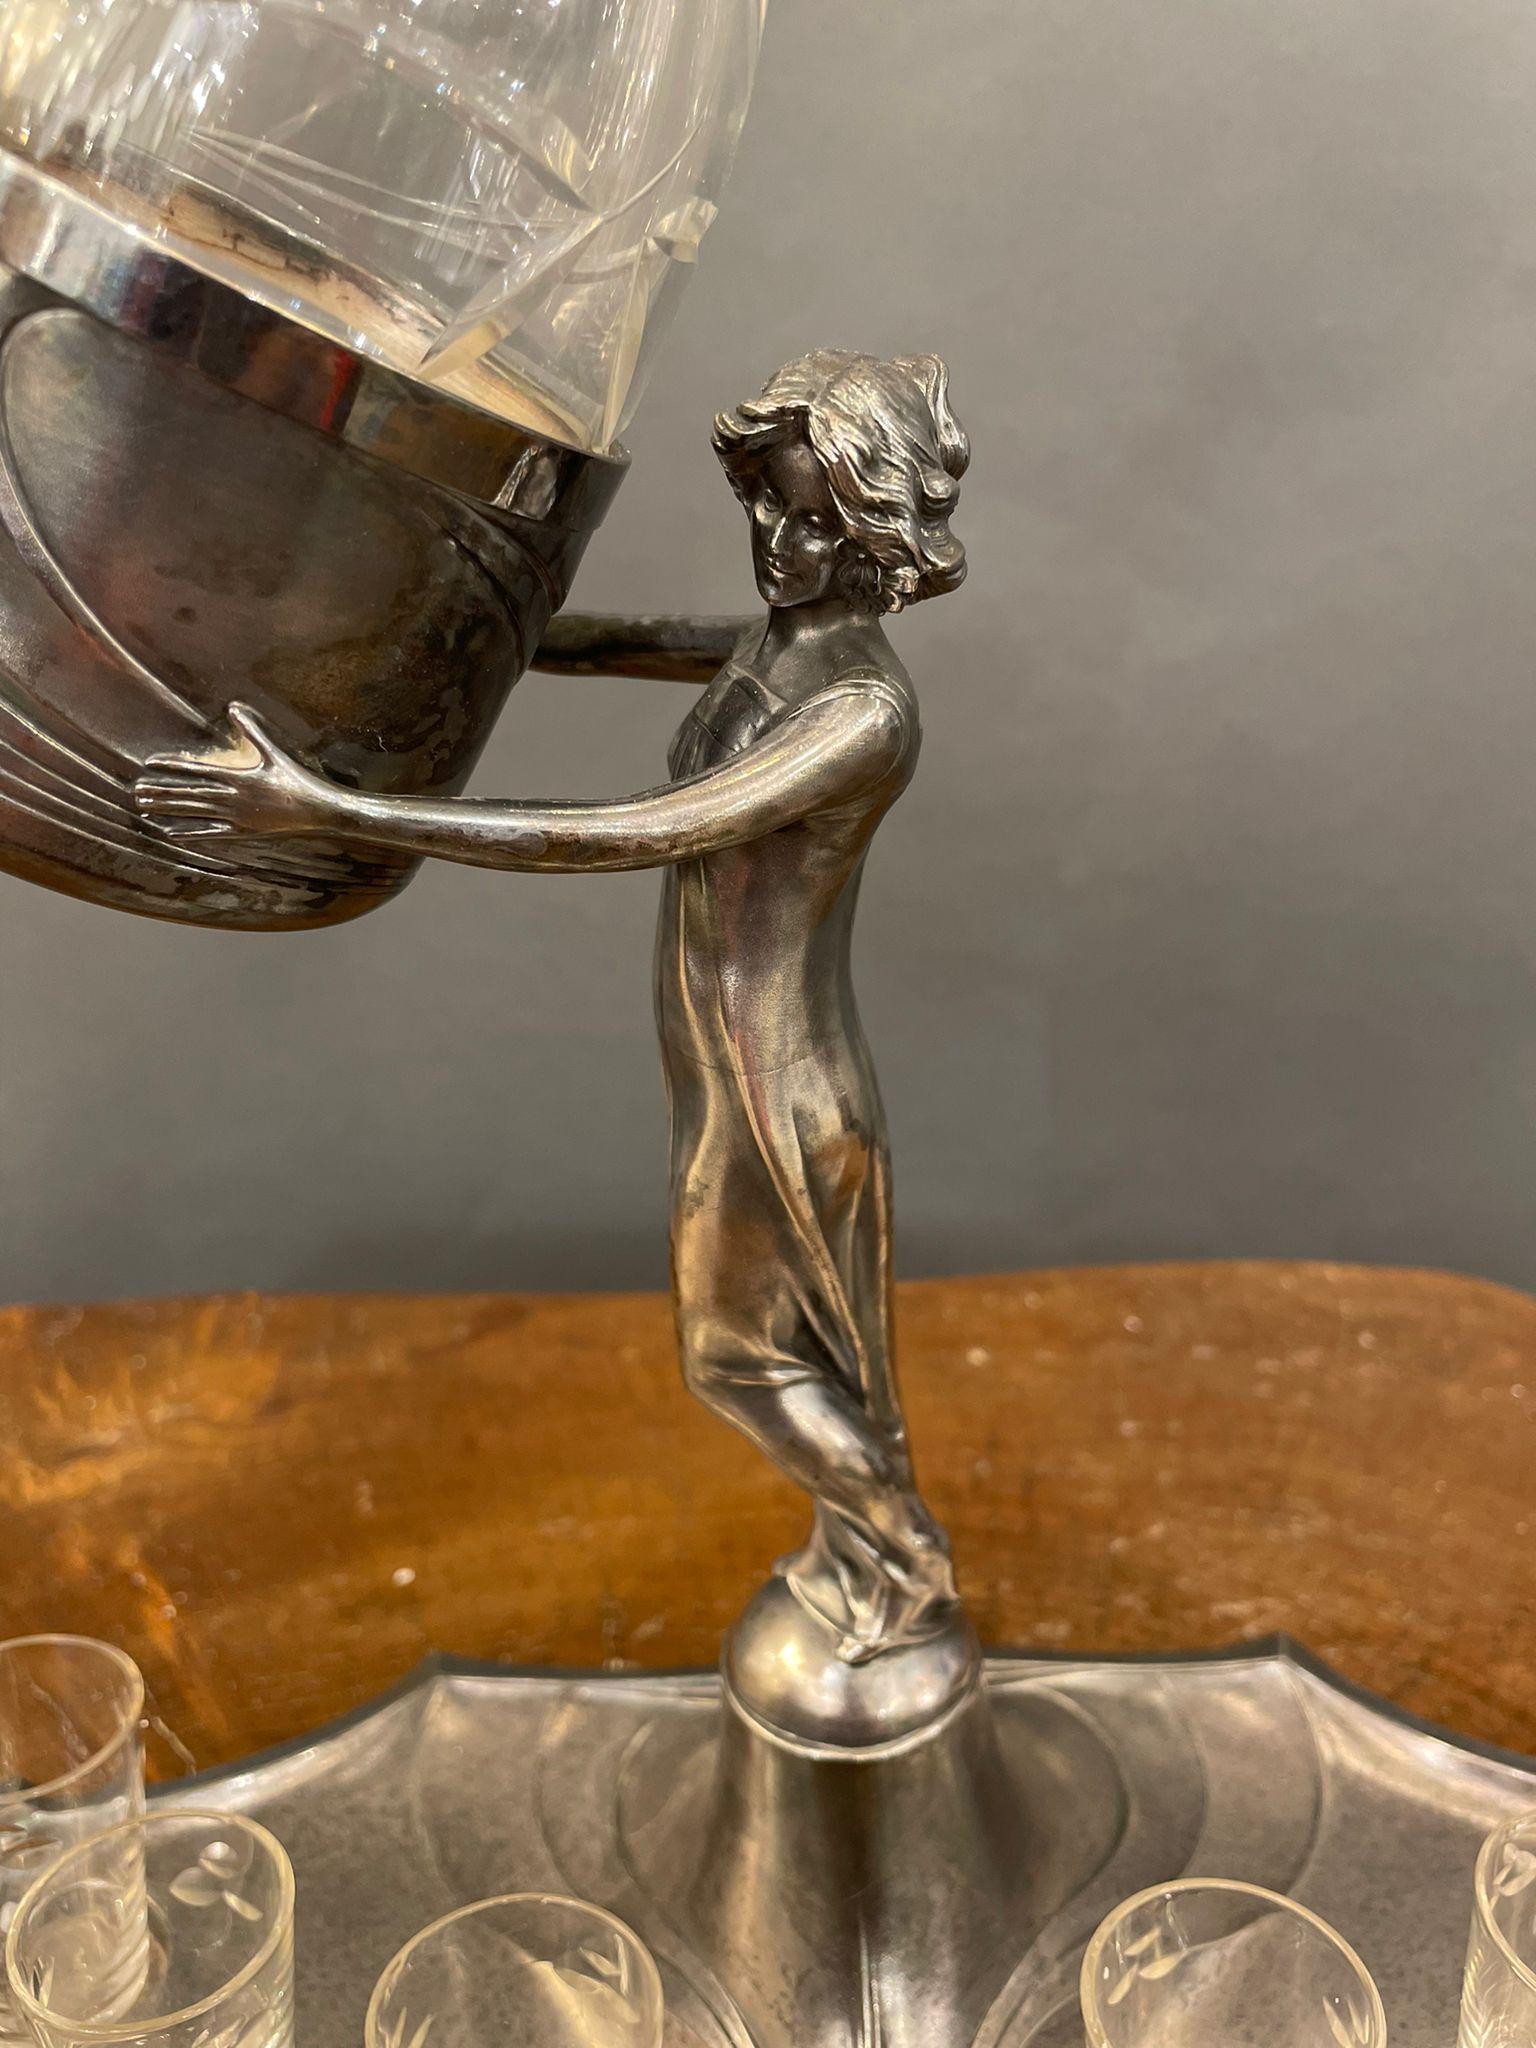 French vintage Art Nouveau nicest liquor set in silver plate with a sculptured female figurine.
Silver plate tray with six small glasses, in the middle of the tray stands a sculptured female figurine wearing a long dress holding the decanter with